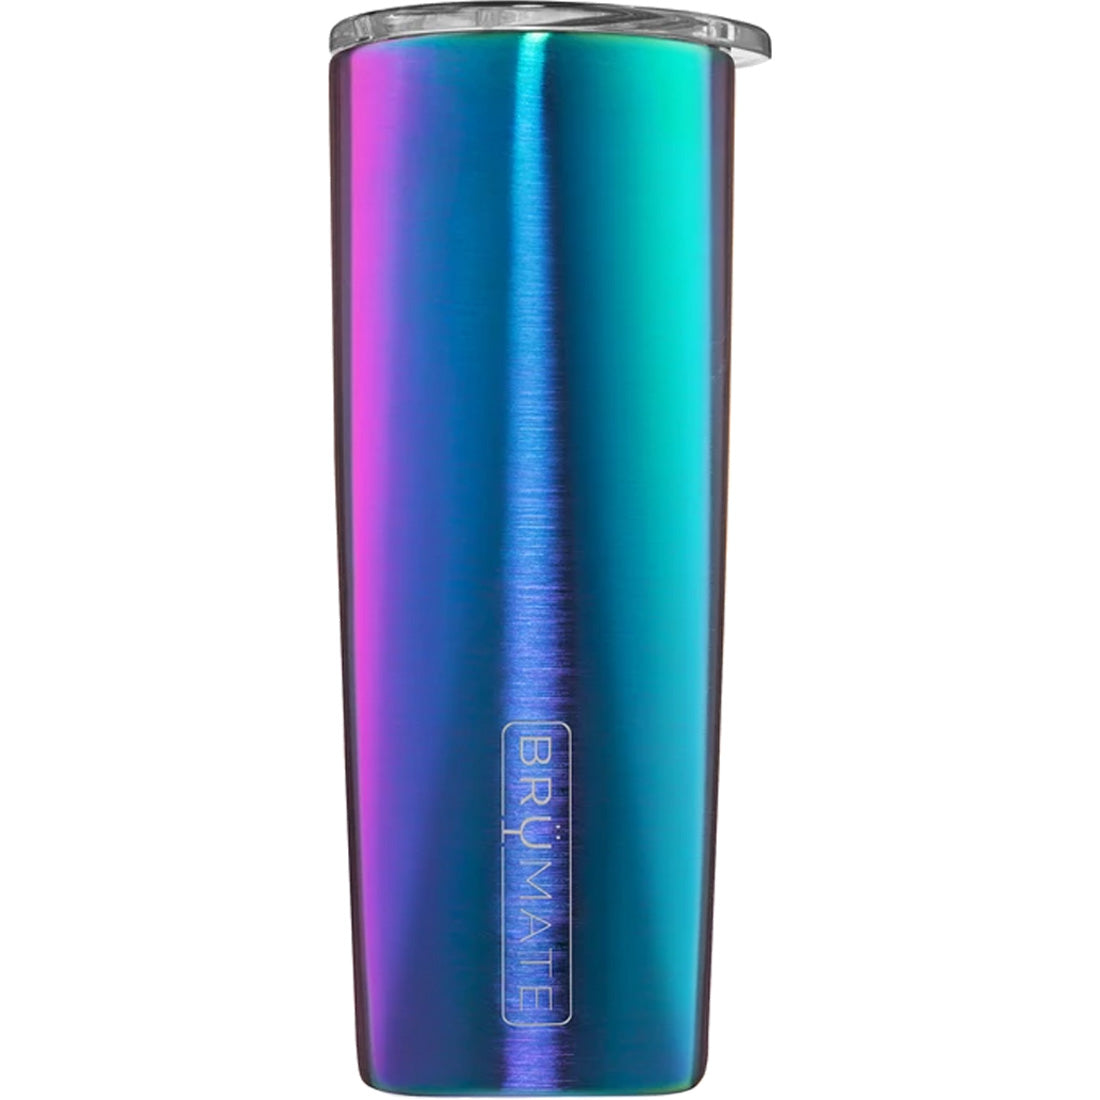 BrüMate Highball - 12oz 100% Leak-Proof Insulated Cocktail Tumbler - Double  Wall Vacuum Stainless St…See more BrüMate Highball - 12oz 100% Leak-Proof